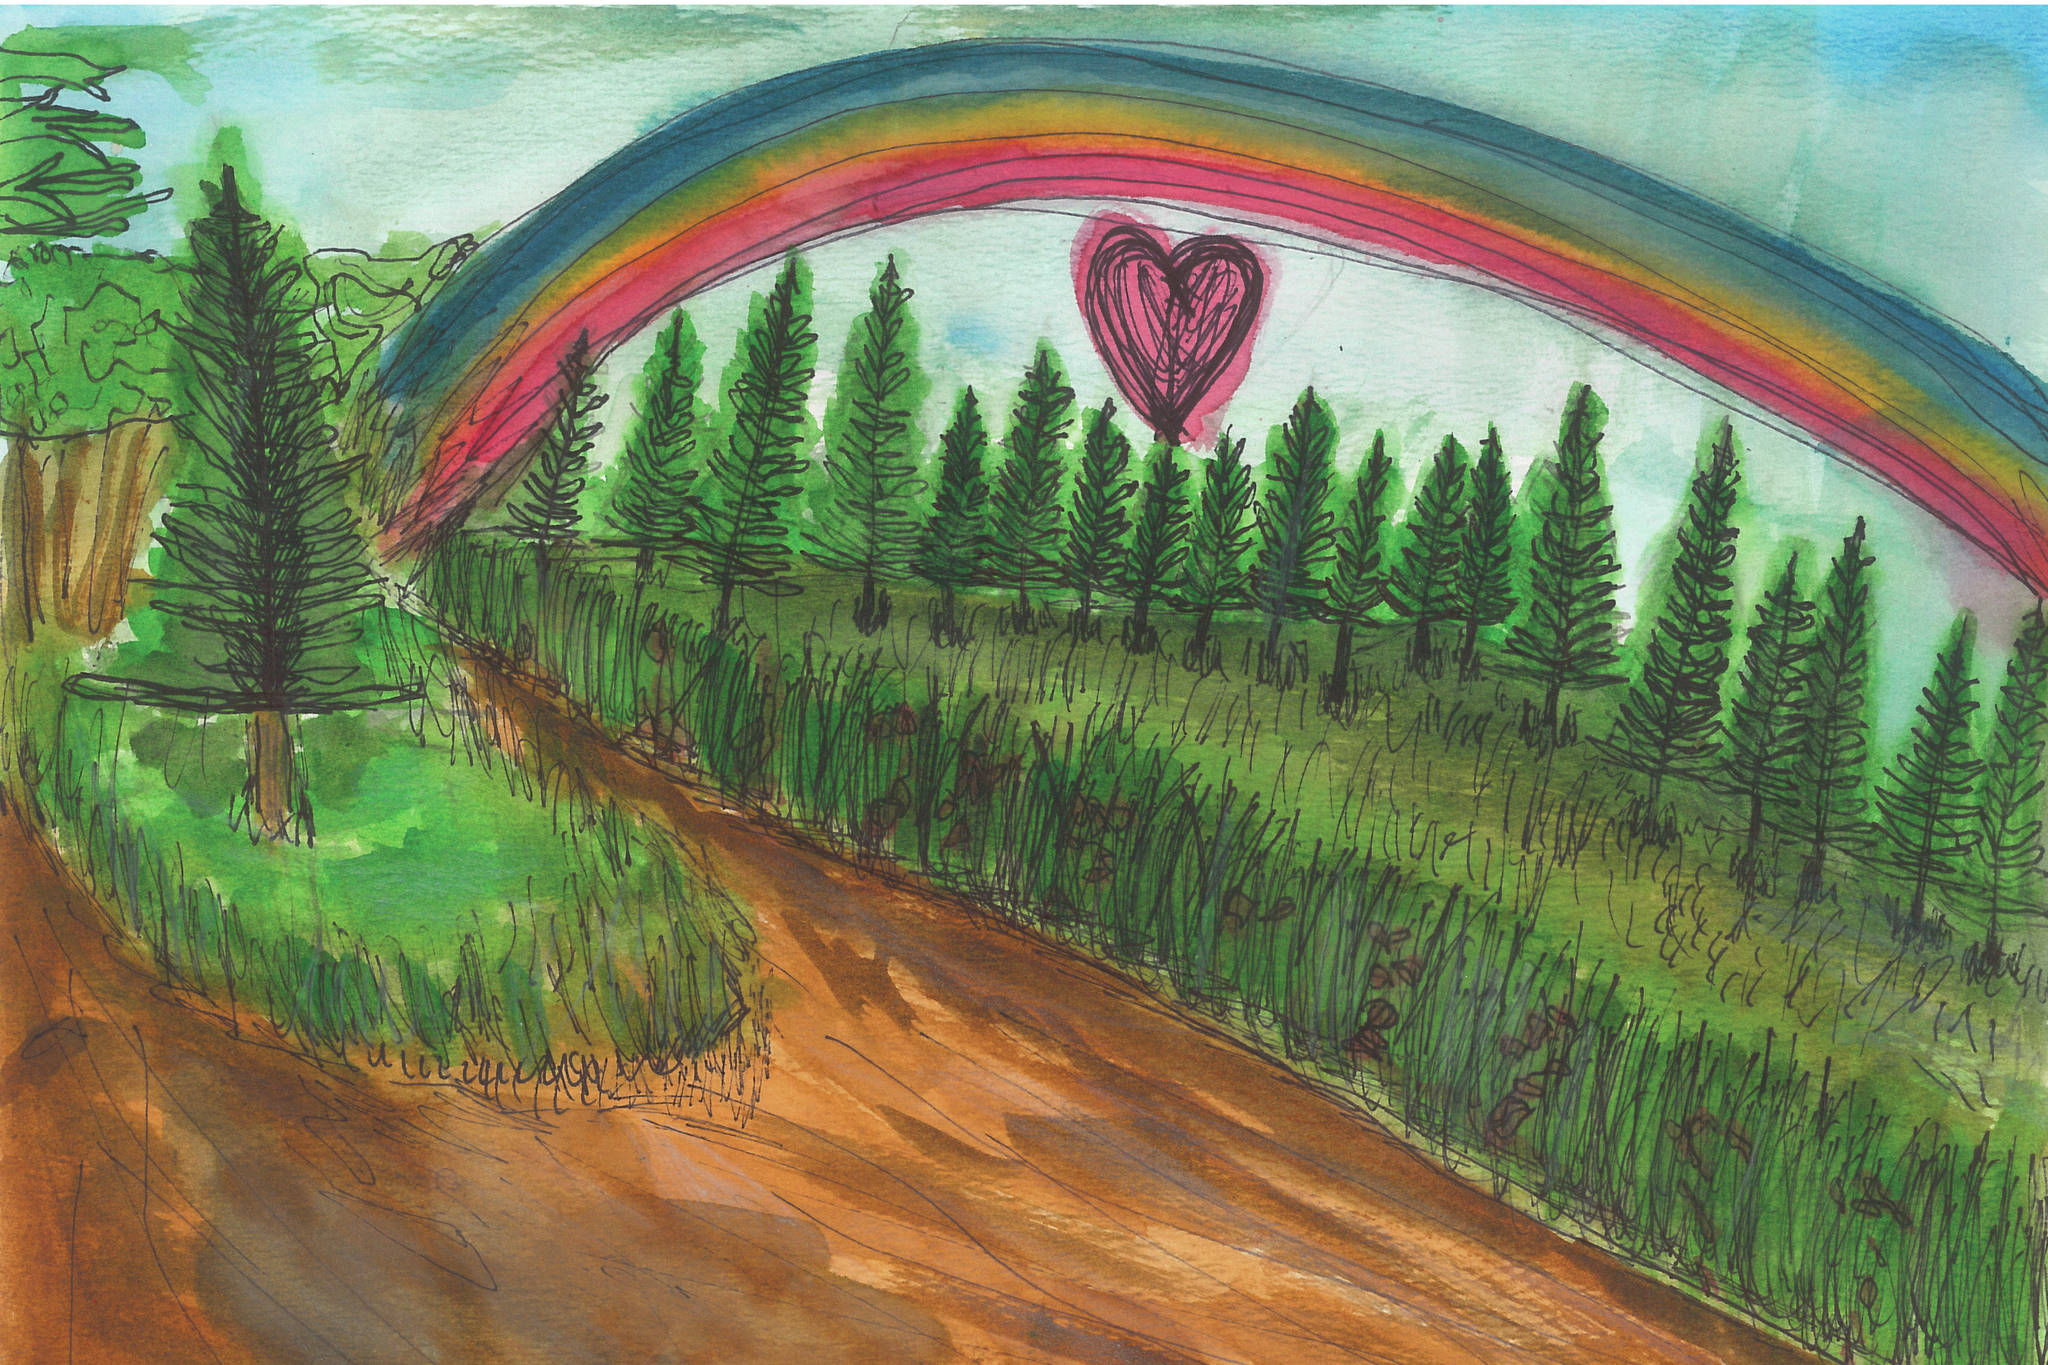 An ink and watercolor painting by Homer High School student Anna Neland was one of the pieces created for the Homer Council on the Arts' "Art from the Heart" project. Student artists created art that was shared in November 2020 with local seniors in isolation during the COVID-19 pandemic in Homer, Alaska. (Photo courtesy Homer Council on the Arts)